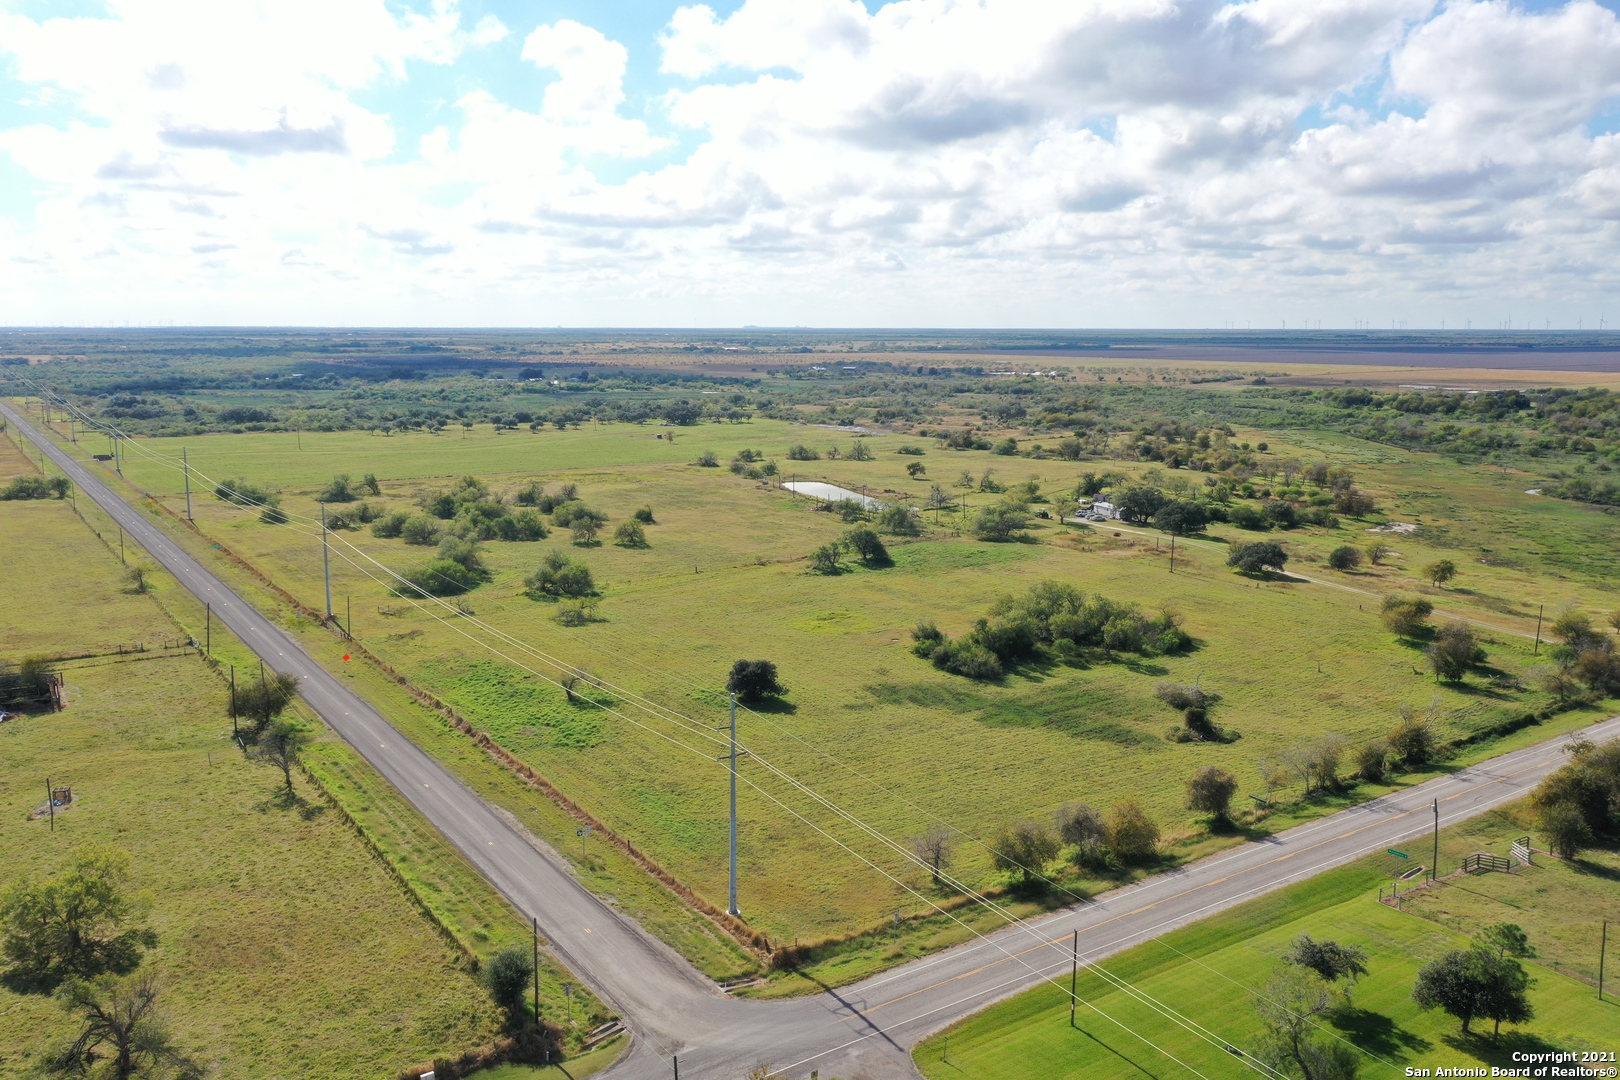 We are selling 75 acres of prime farm/ranch land in Woodsboro TX. Less than 4 miles to Woodsboro and only 10 minutes to Bayside and 40 Min to Corpus Christi. This property is currently leased for grazing and hay but the lease can be canceled with a 60 day notice. There is paved road frontage and to the right side and packed gravel road to the back. Can enter from 3 roads.  The property is fenced and cross fenced as well.     The land is estimated at 75 acres give or take. It will be surveyed once an offer is accepted. There is a total of 79.8 acres with a house. The house and 5 acres are also on the market for $295,000.00.